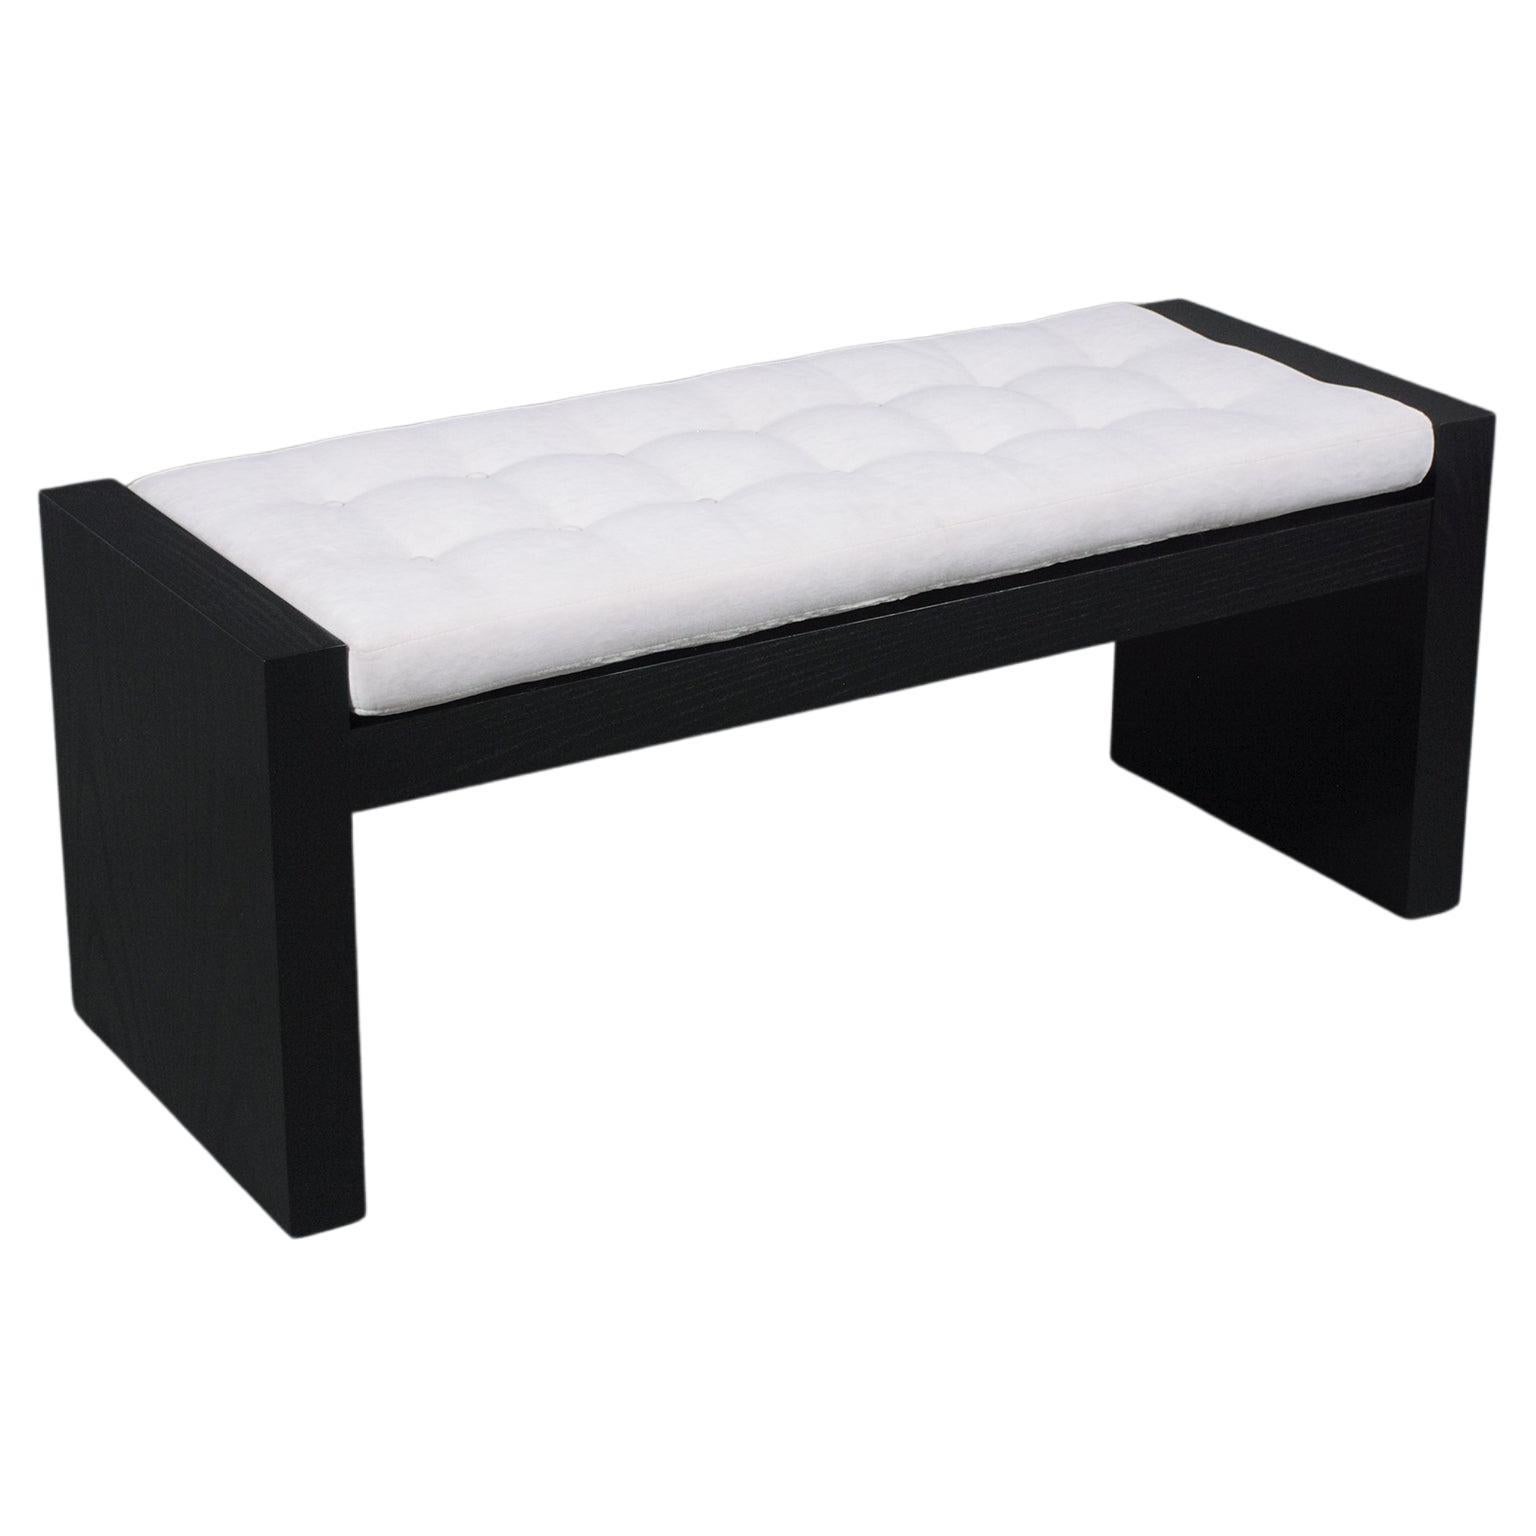 Mid-Century Modern Tufted Upholstered Bench